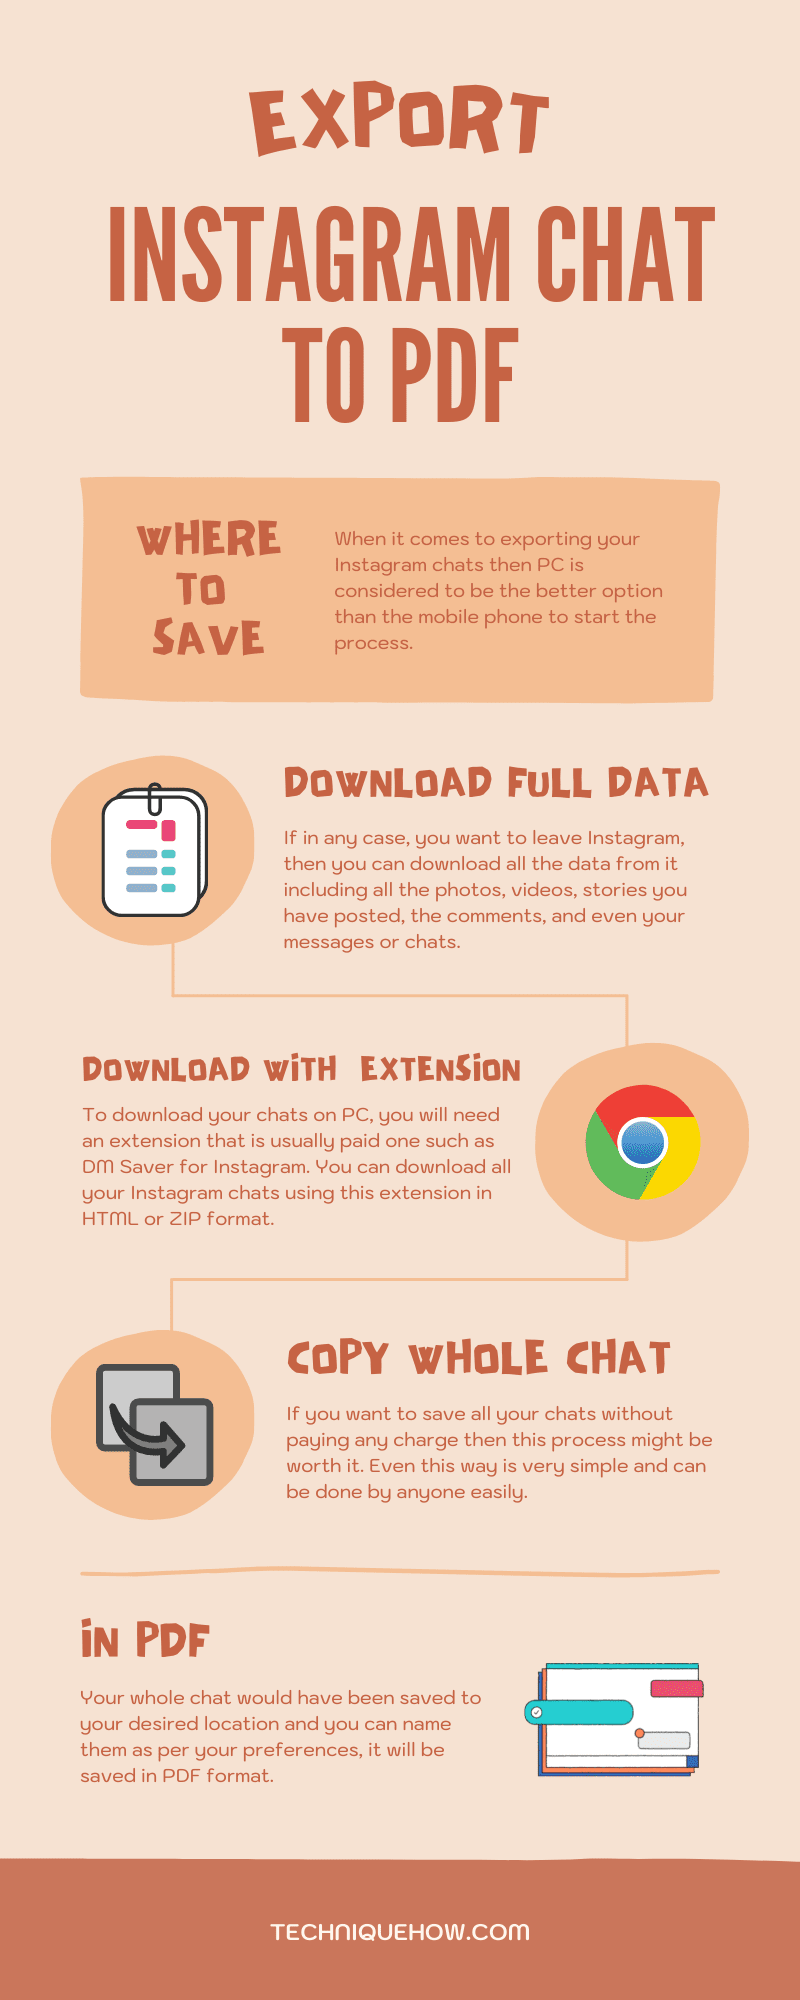 infographic_Export Instagram Chat to PDF